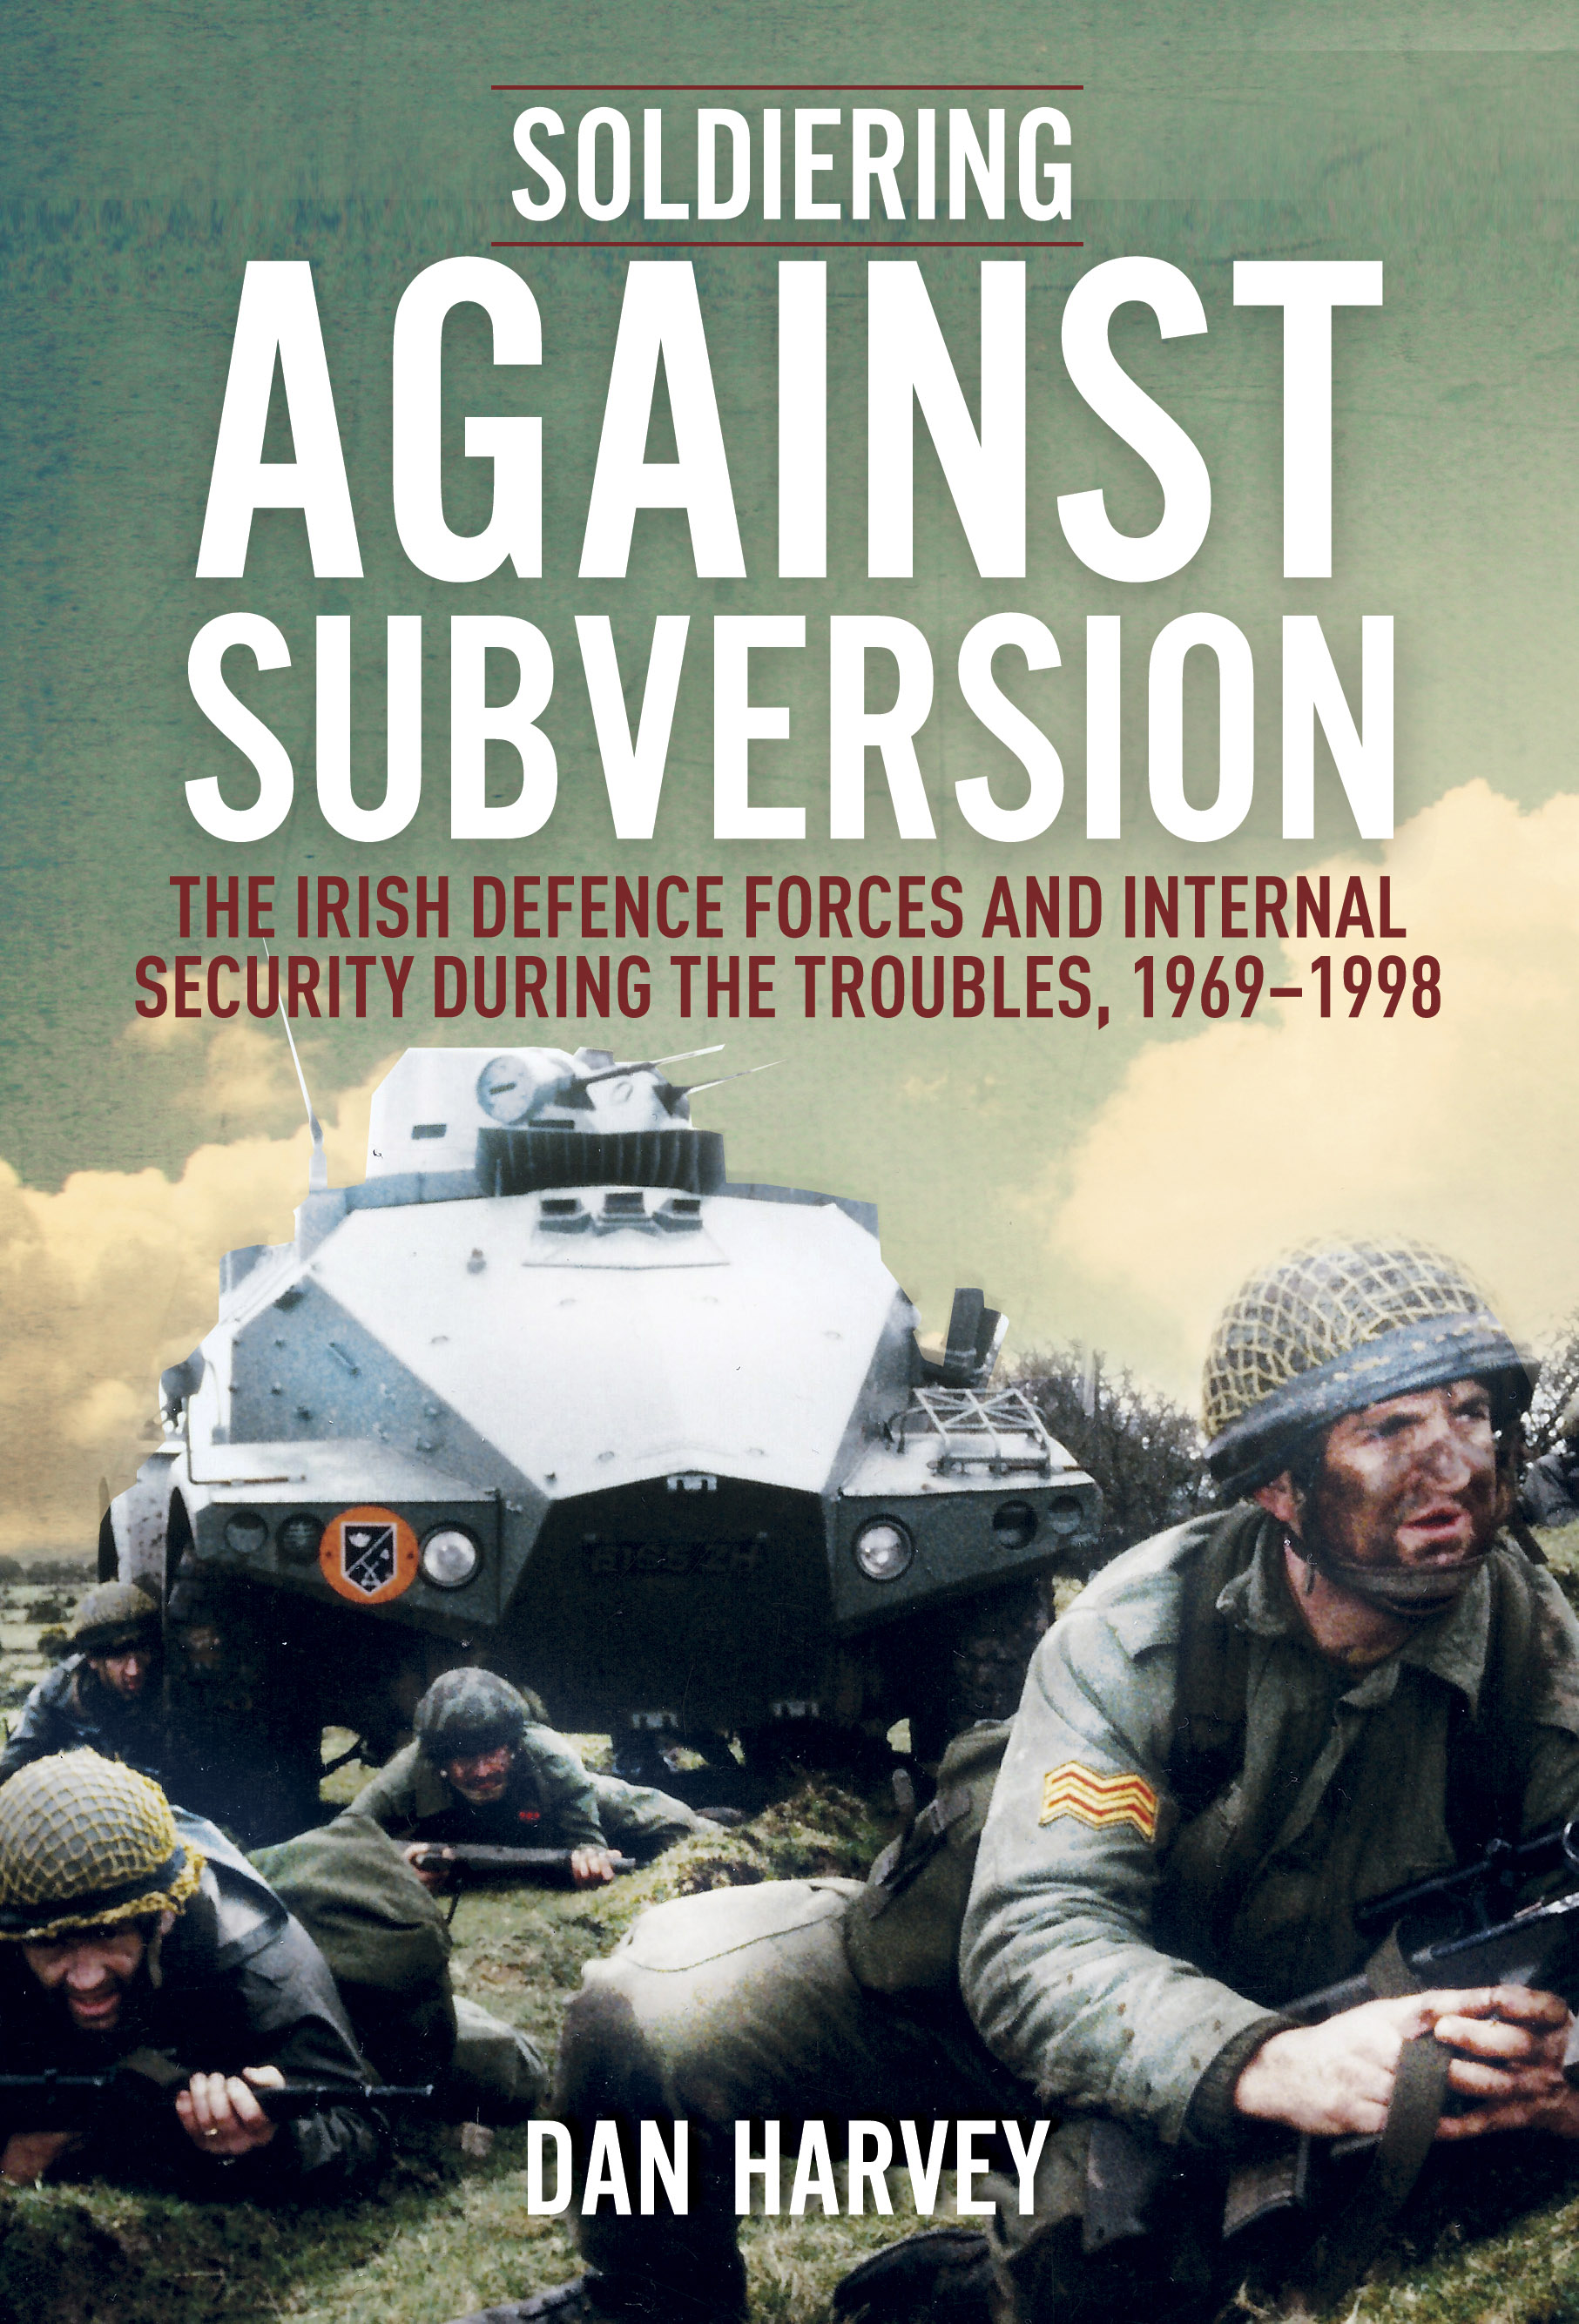 Soldiering Against Subversion: The Irish Defence Forces and Internal Security During the Troubles, 1969–1998